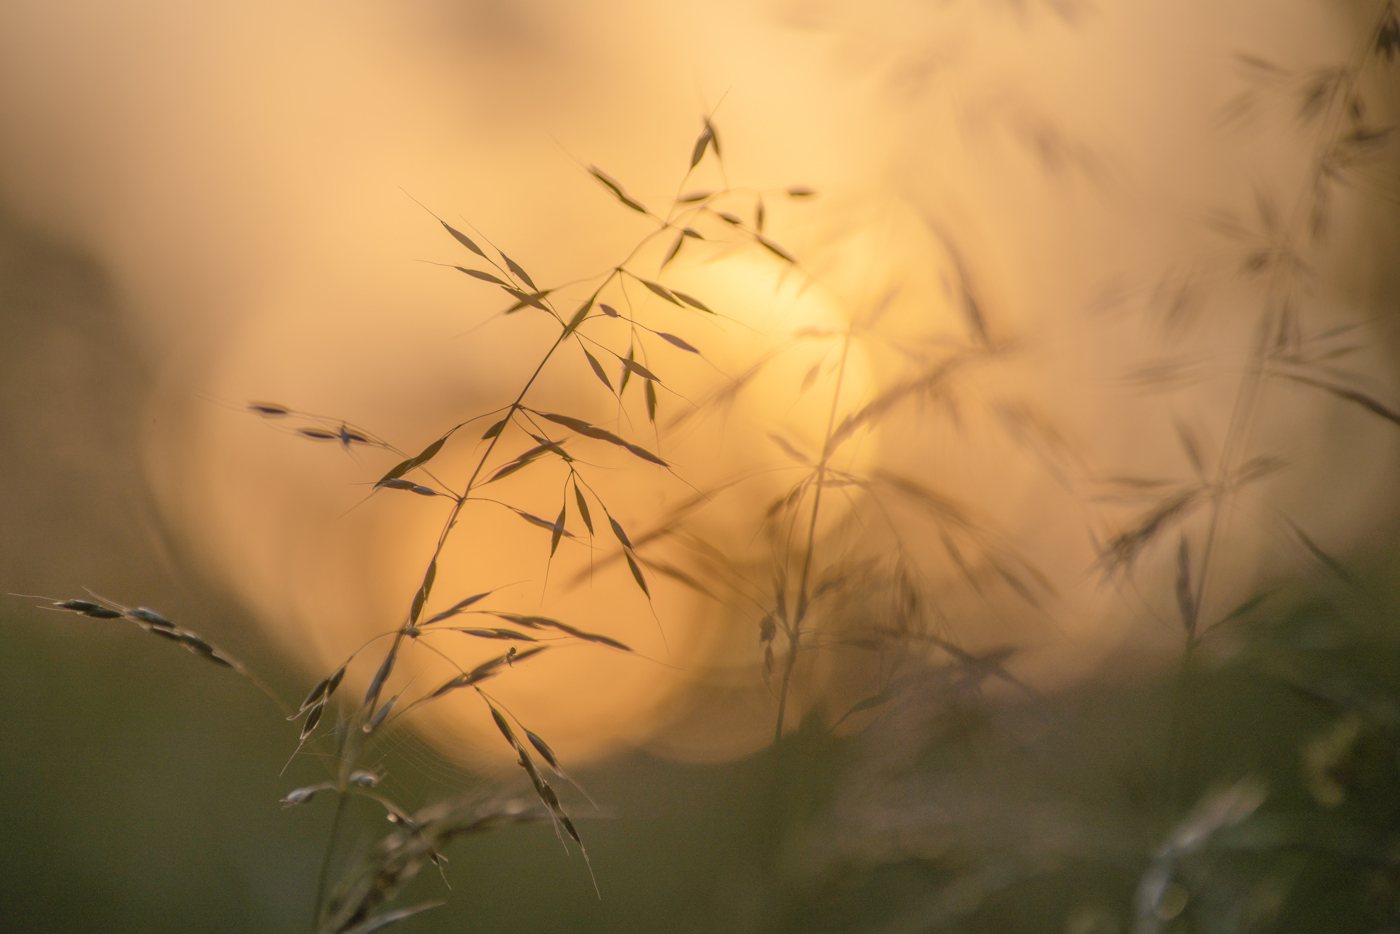 Delicate grass stems and seed heads silhouetted against a soft-focus golden sunset, evoking a serene North Yorkshire evening. The warm light bathes the scene in an amber hue, highlighting the fine details of the grass. a bird flying in the sky